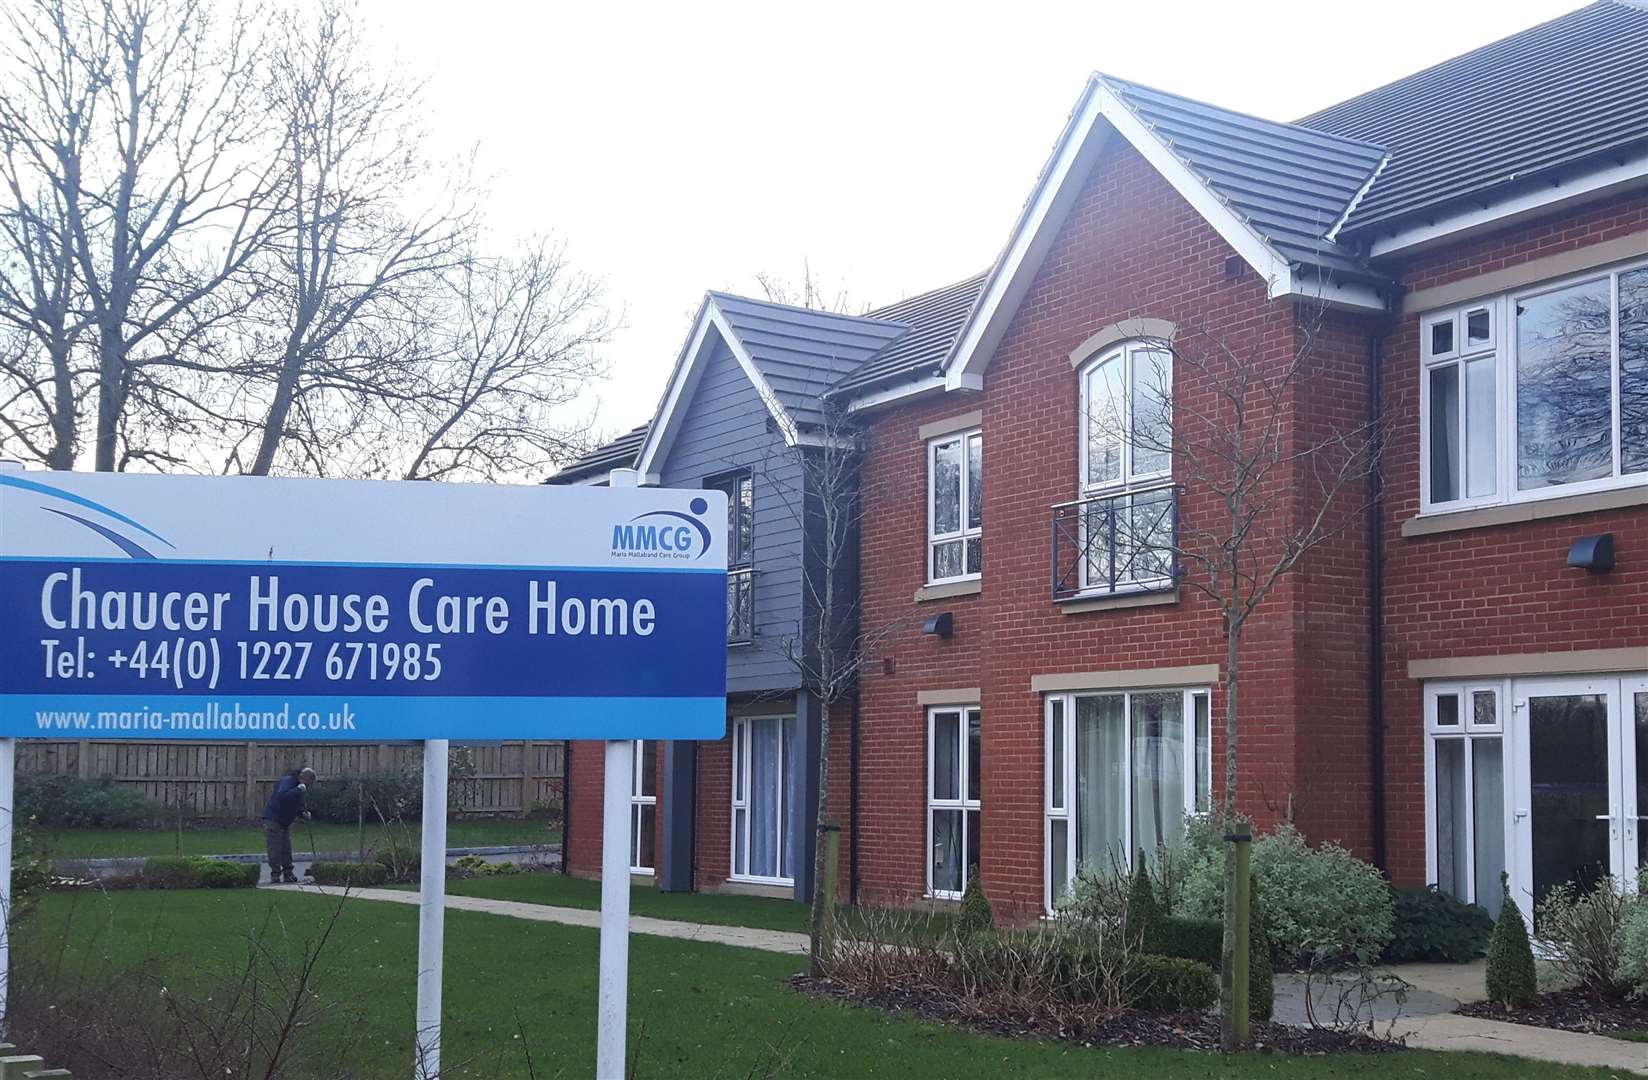 Chaucer House care home has been rated as requiring improvement.